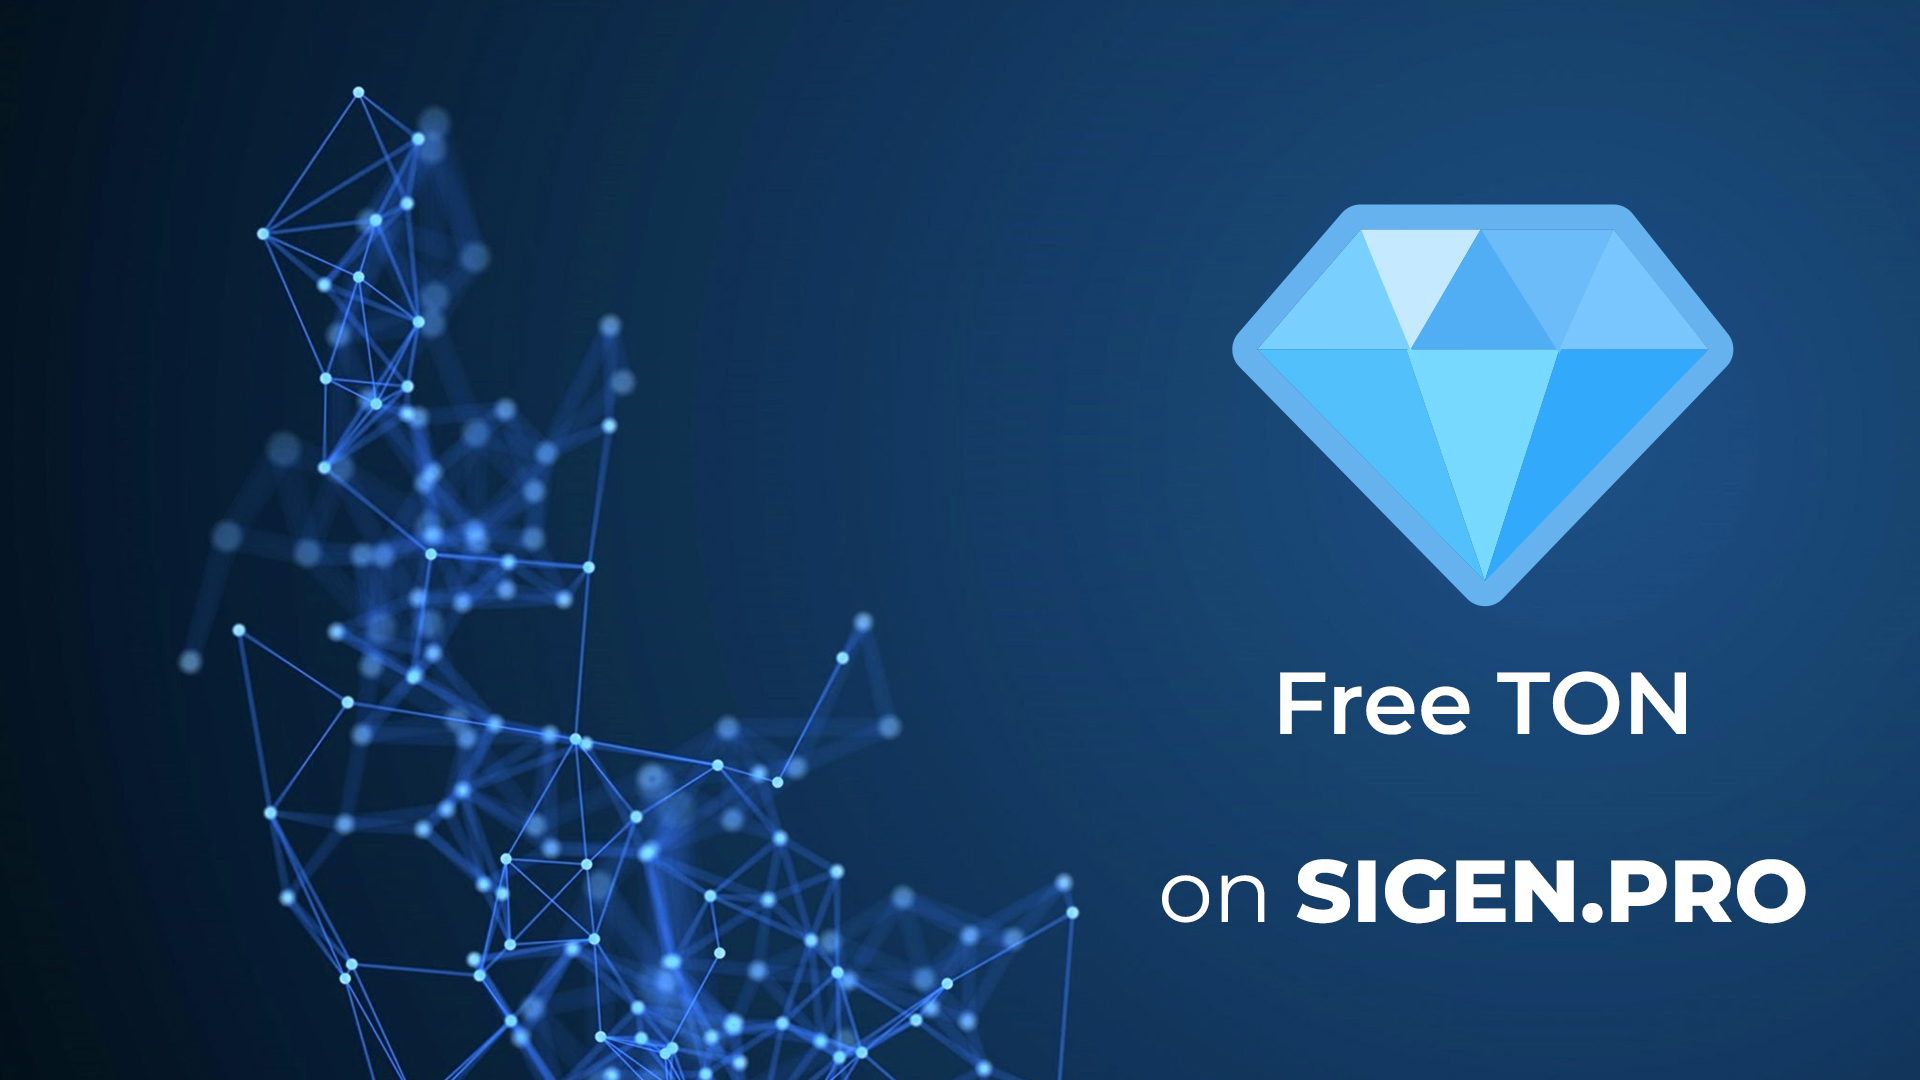 SIGEN.pro announced the listing of the TON cryptocurrency